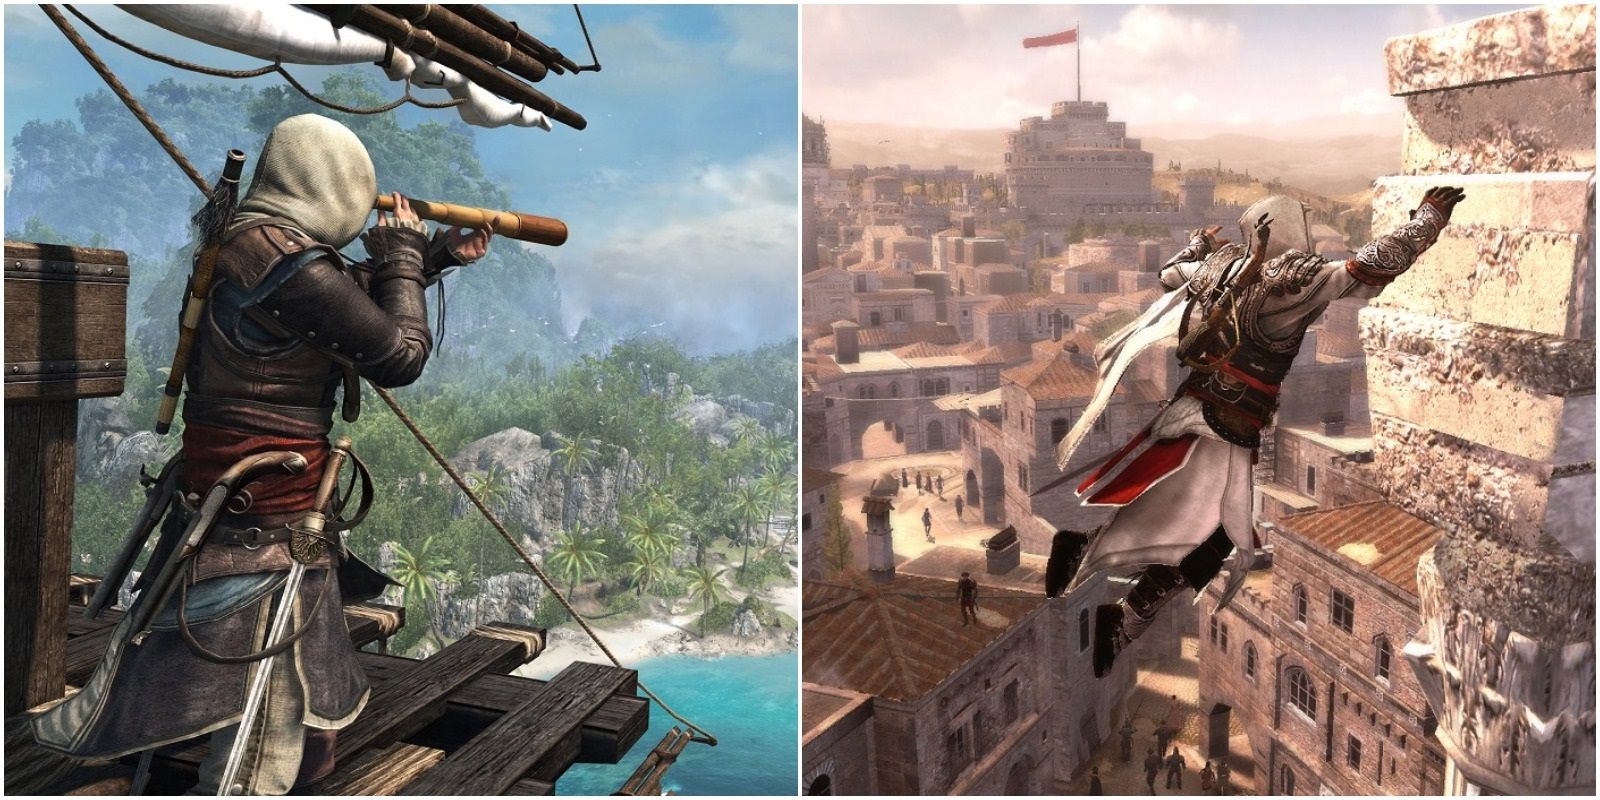 Basic Plot and Gameplay - Assassin's Creed PC